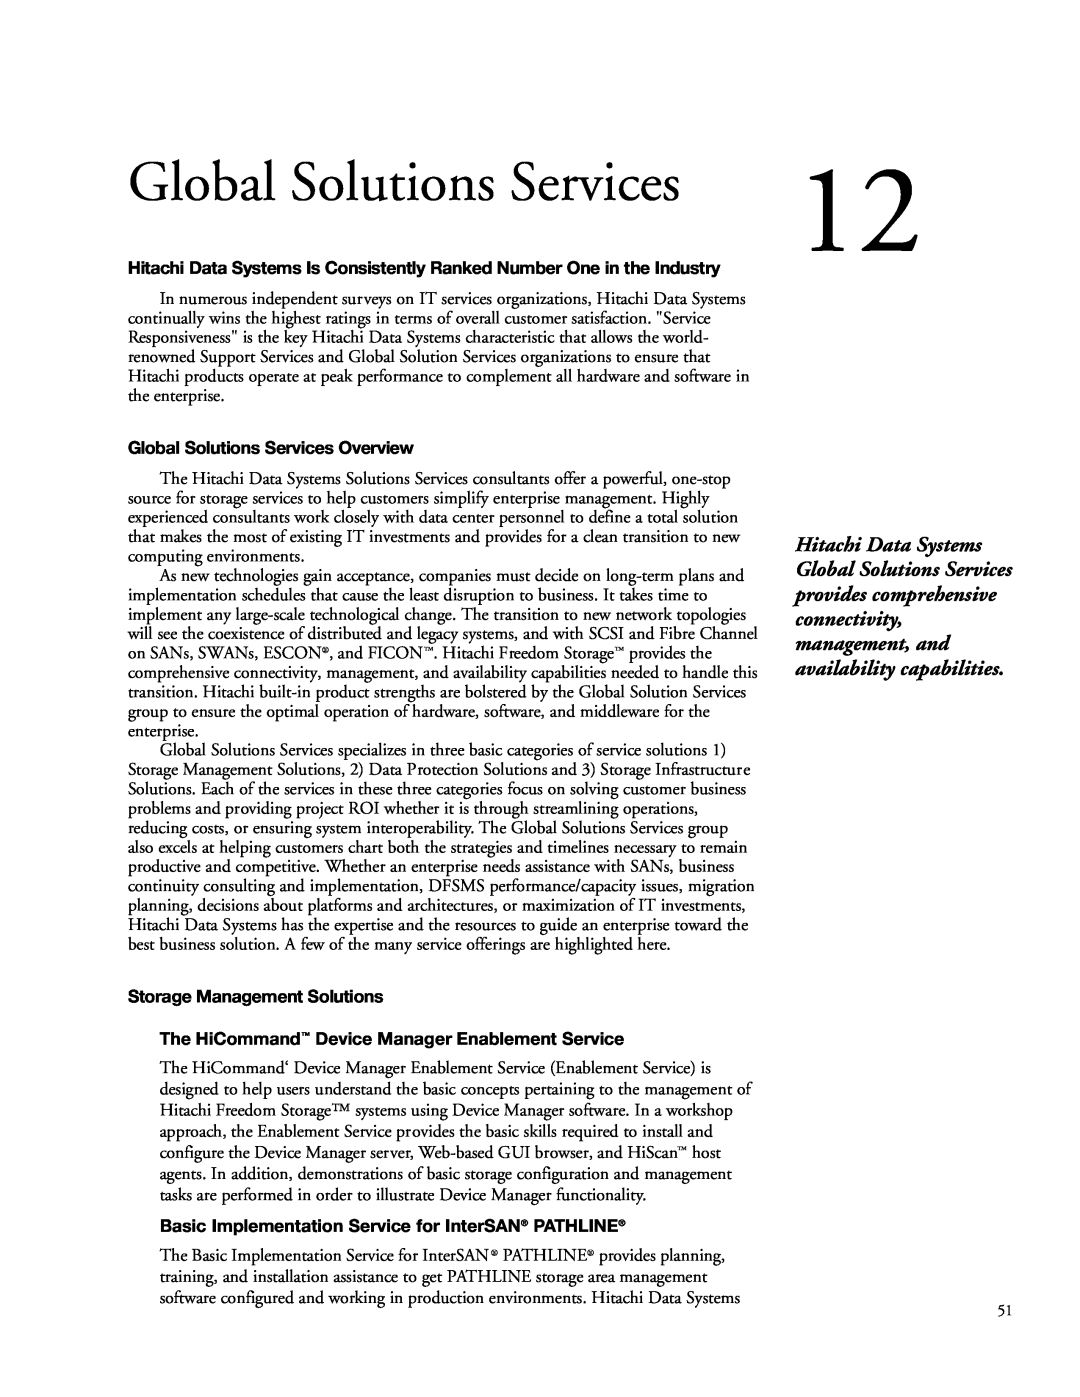 Hitachi 9900 manual Global Solutions Services Overview, Storage Management Solutions 